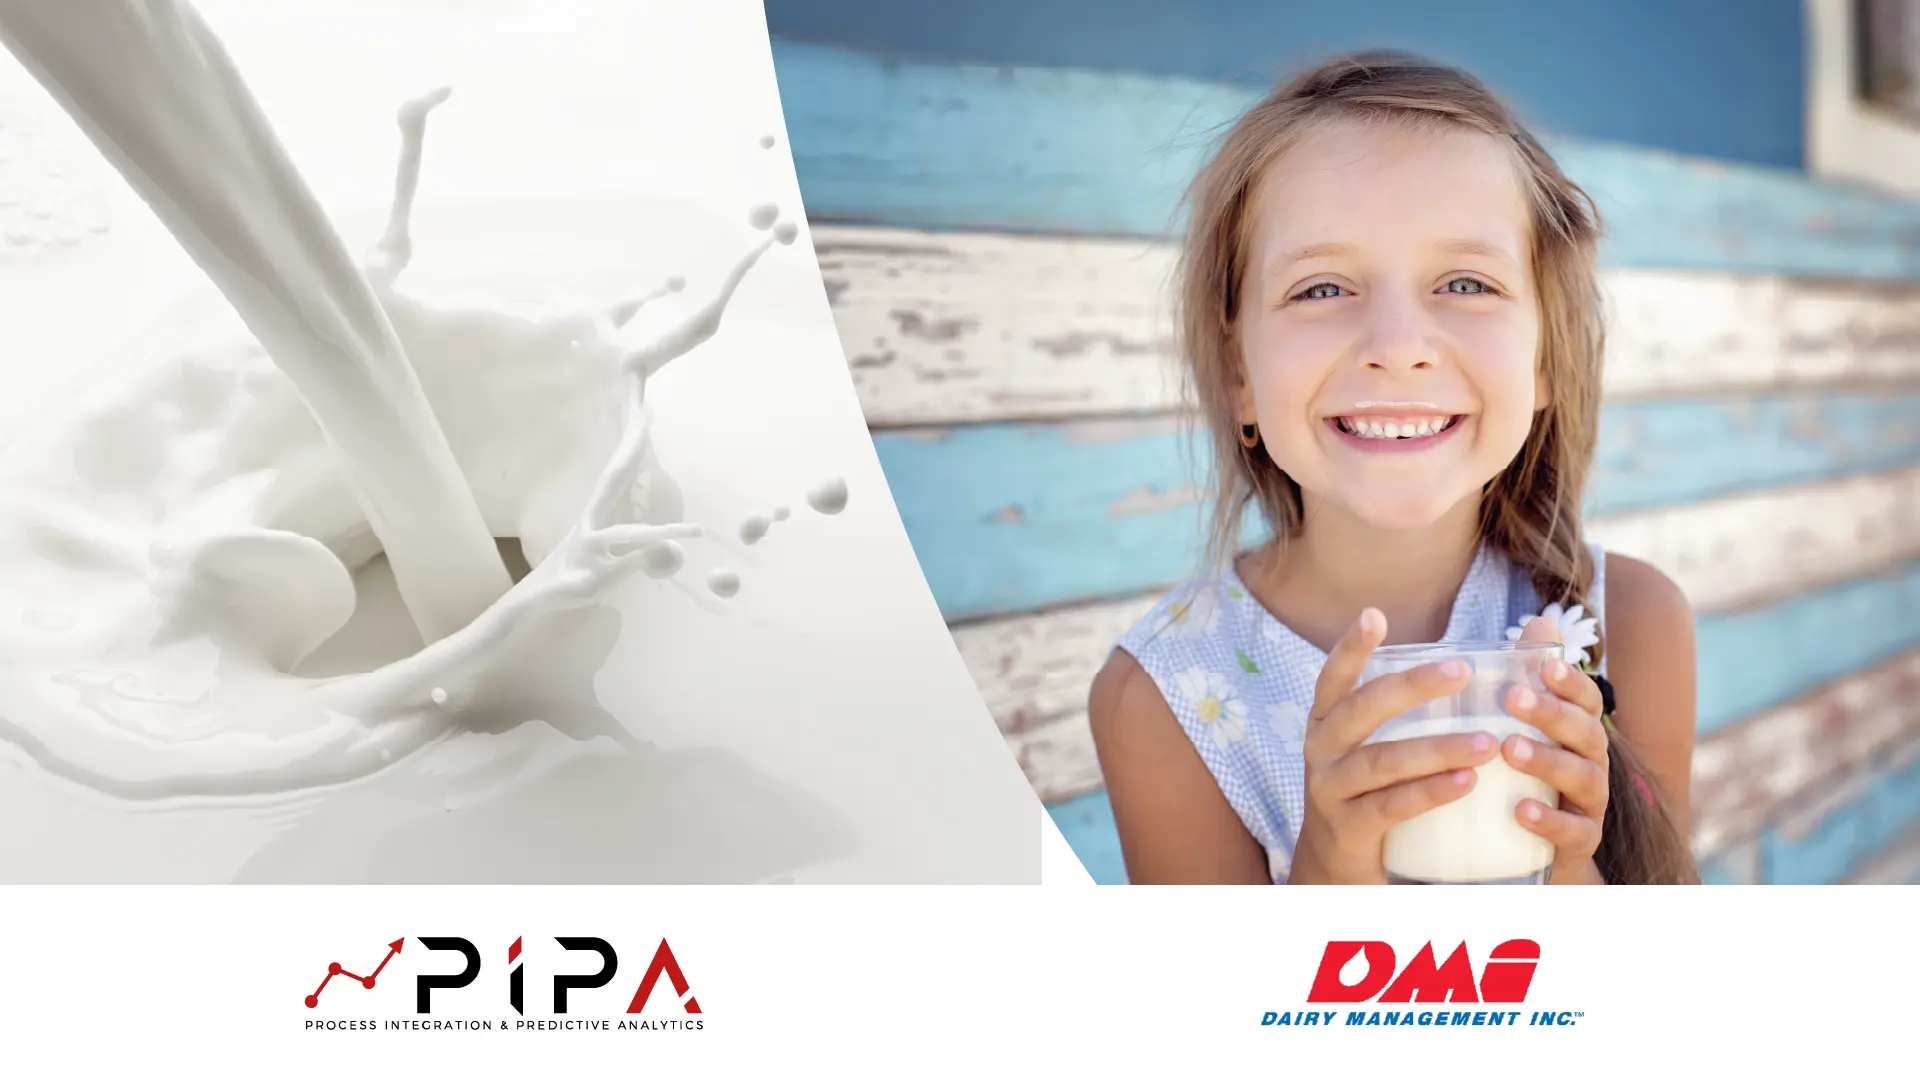 We are happy to announce that PIPA and Dairy Management Inc. are joining forces to uncover hidden health benefits of dairy through Artificial Intelligence.